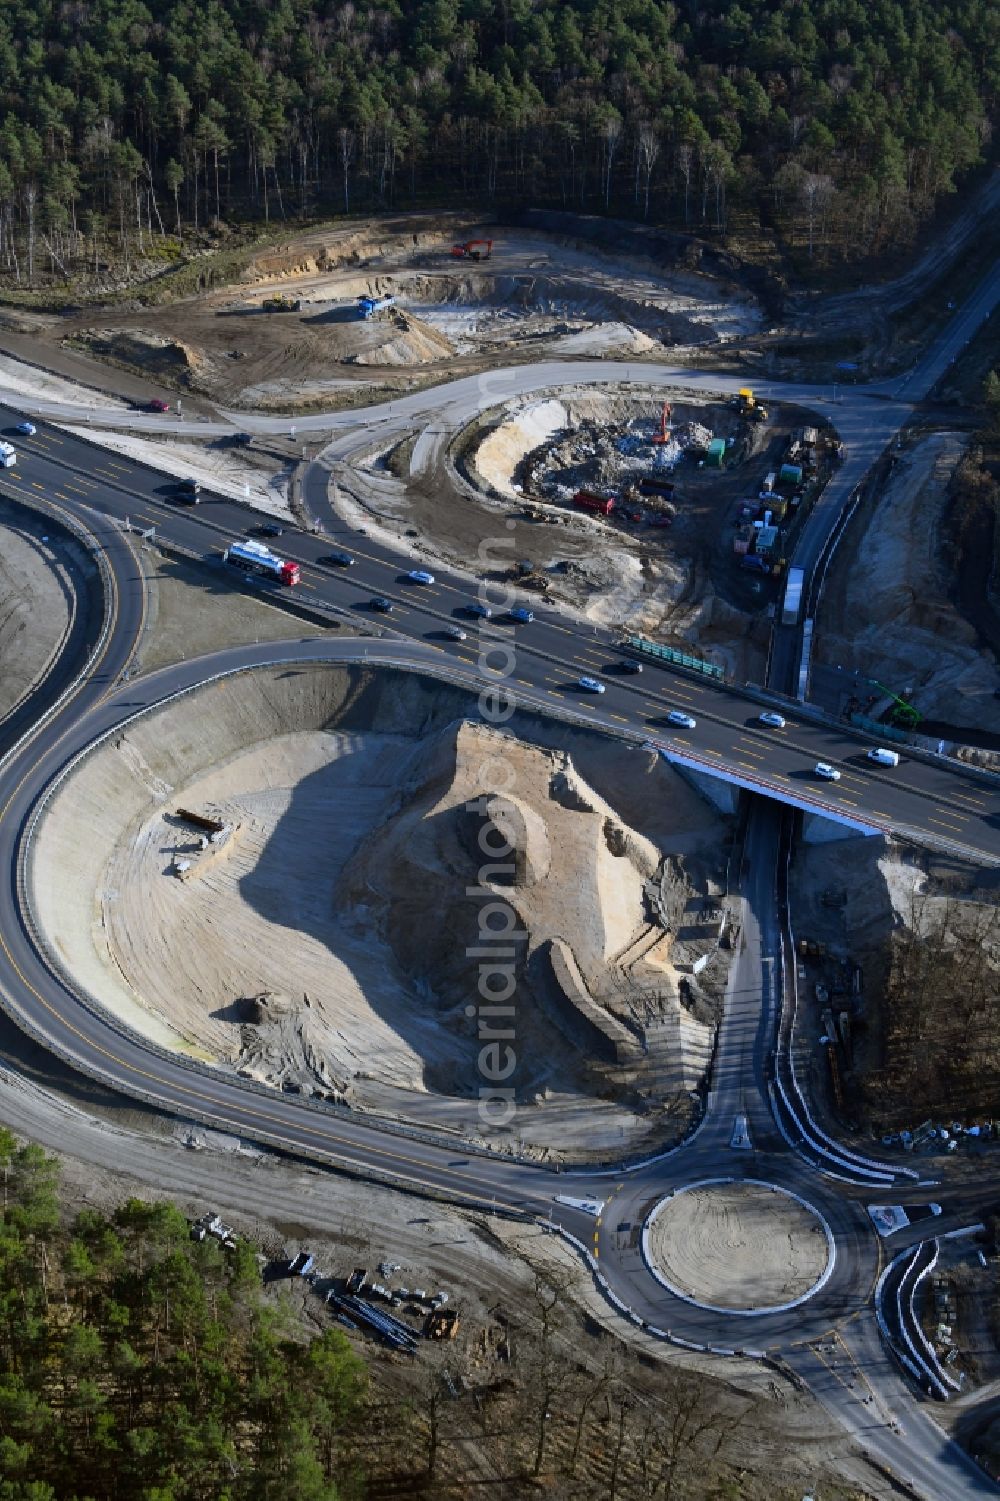 Ferch from above - Construction site for the expansion of traffic flow on the motorway BAB A 10 in Ferch in the state Brandenburg, Germany